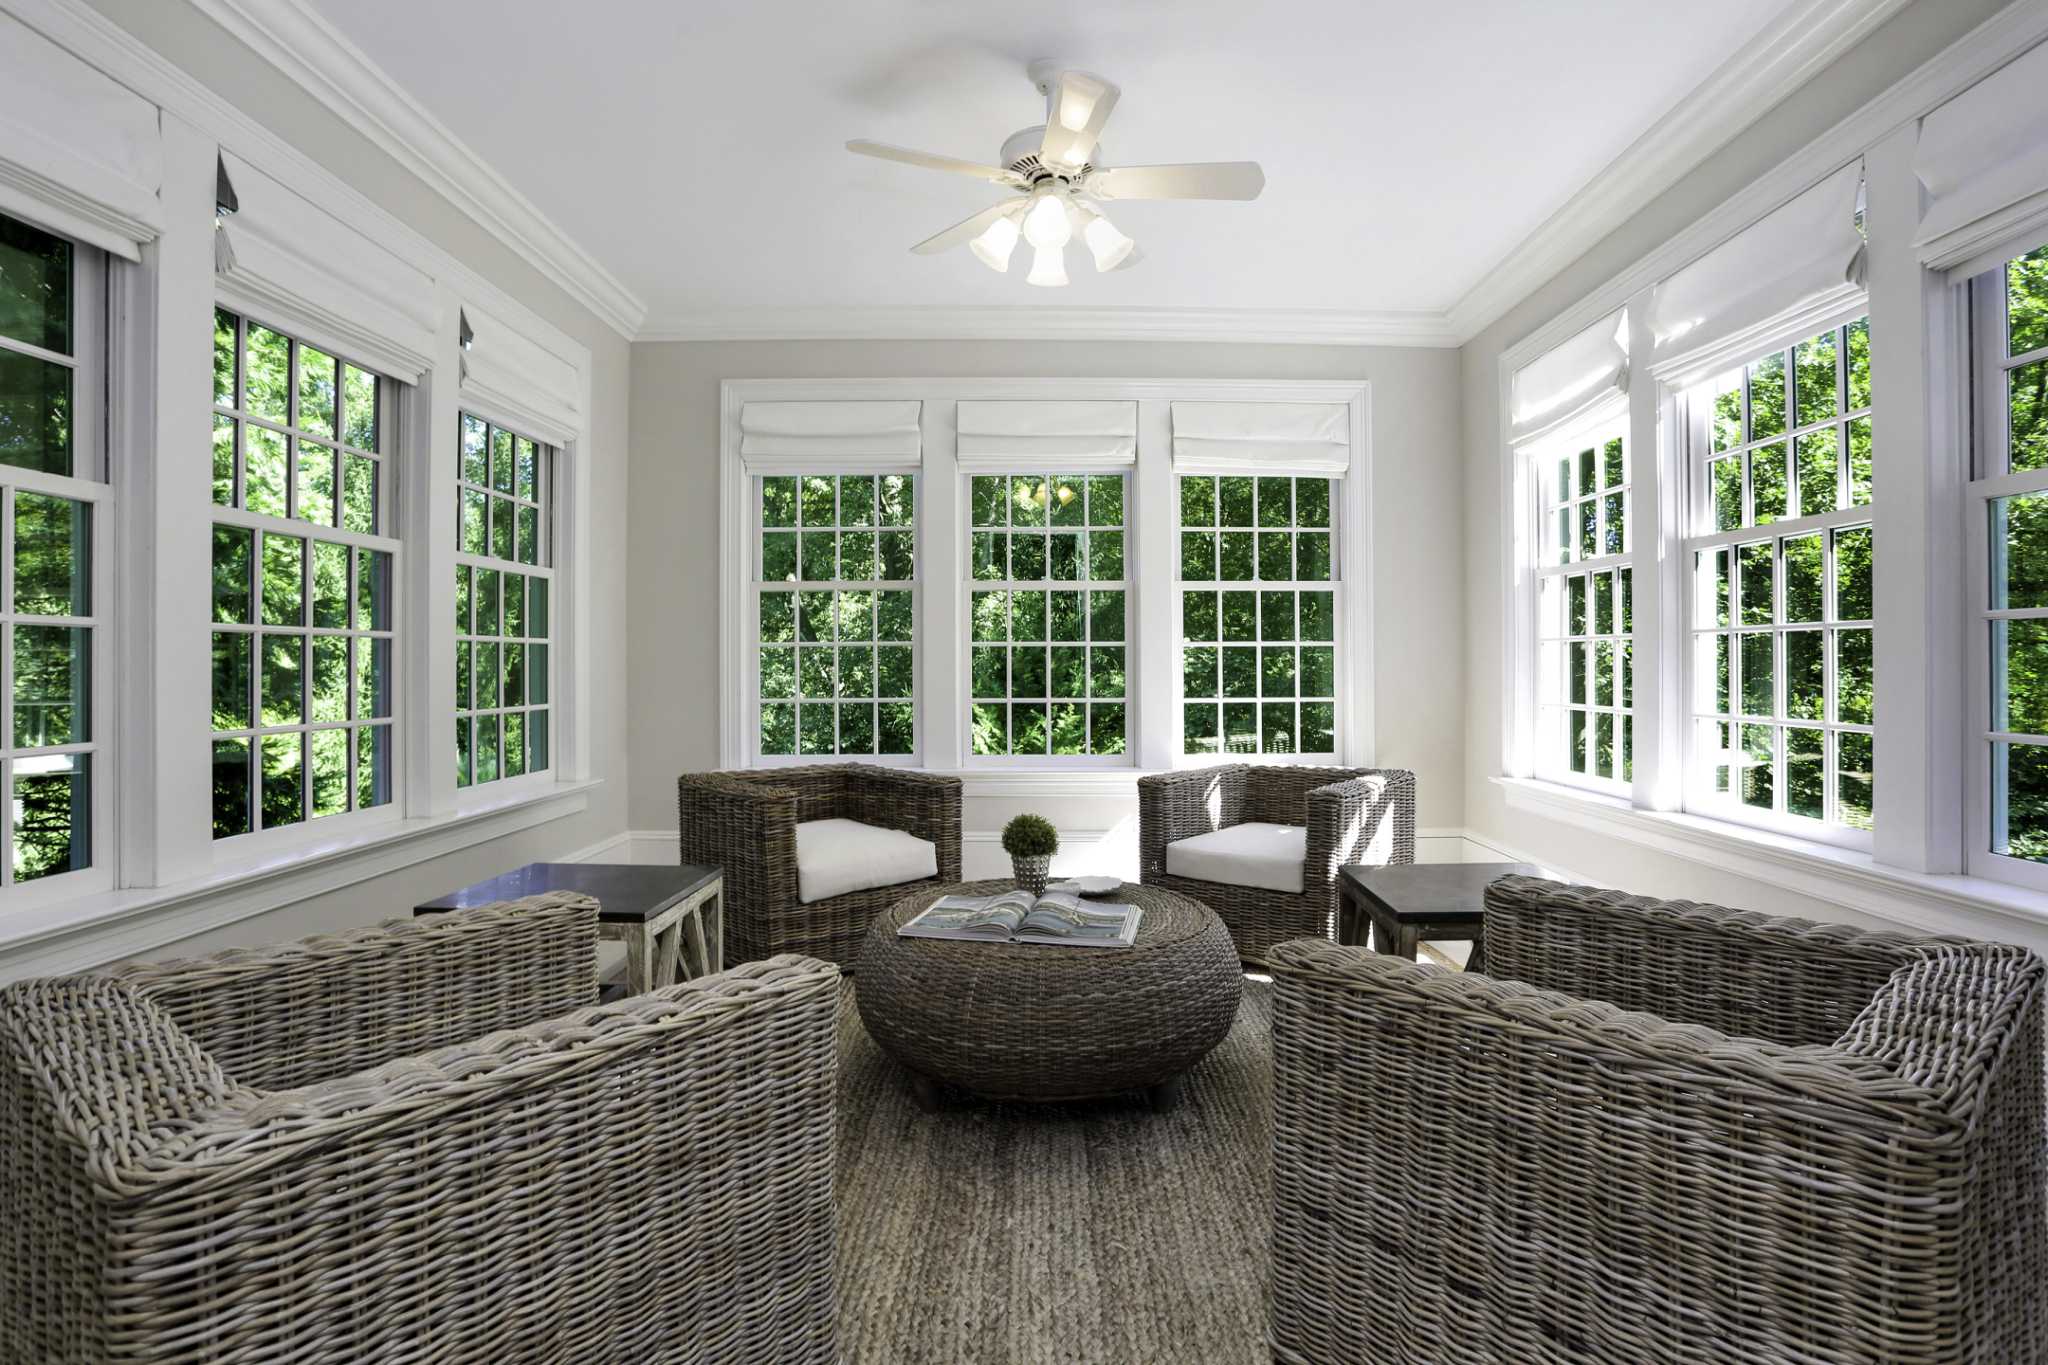 Sunrooms, solariums add a bright spot to any property